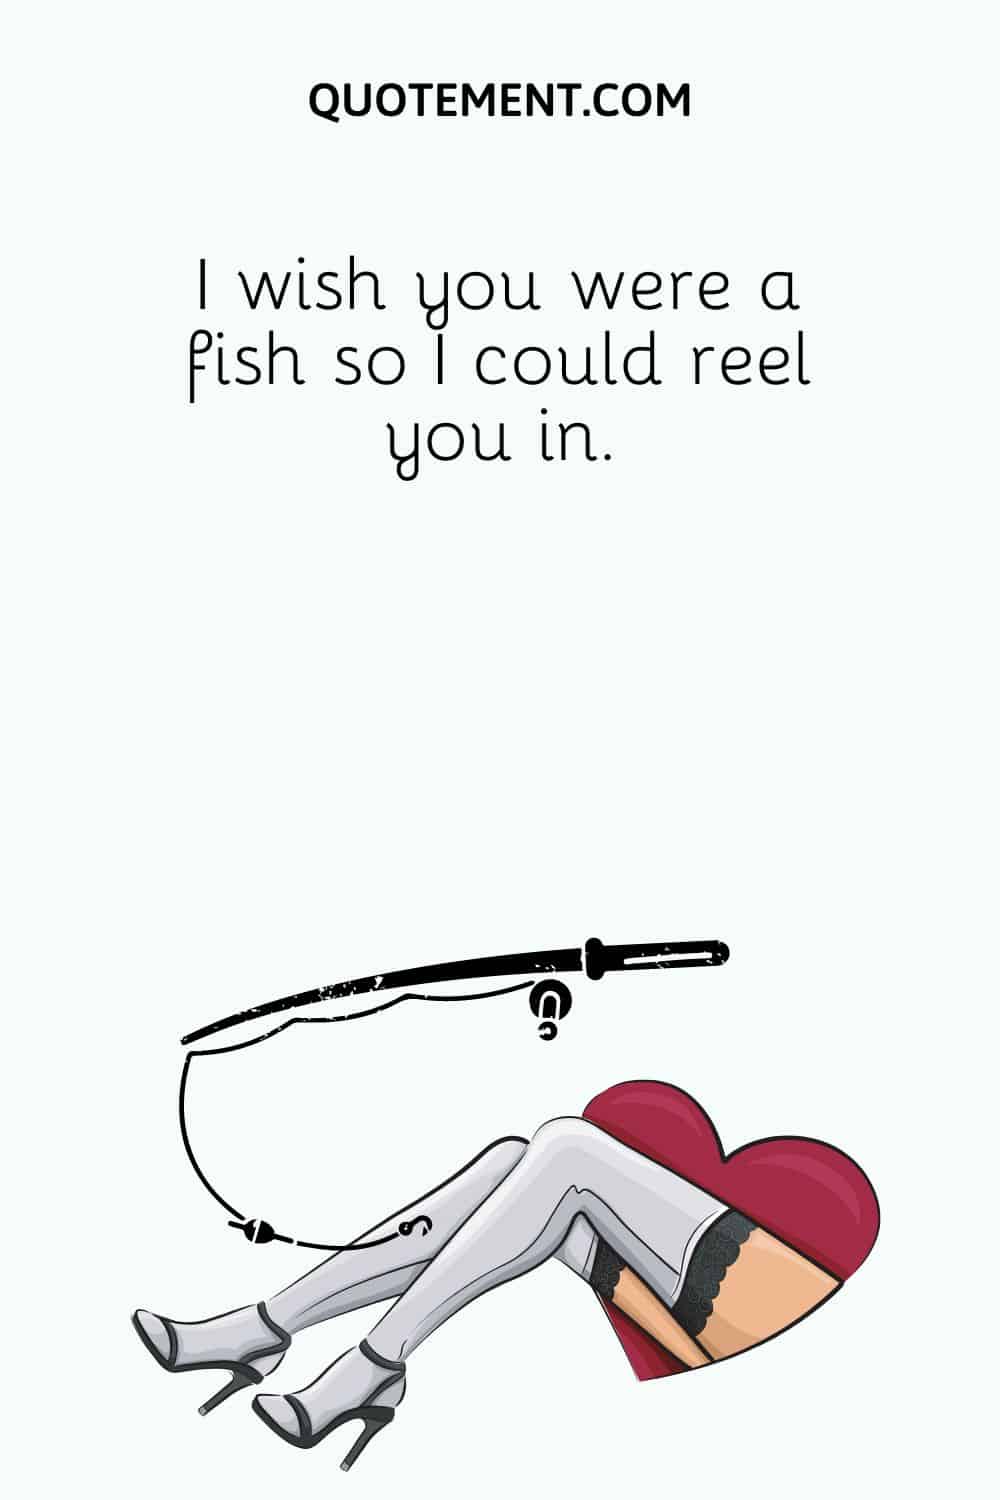 I wish you were a fish so I could reel you in